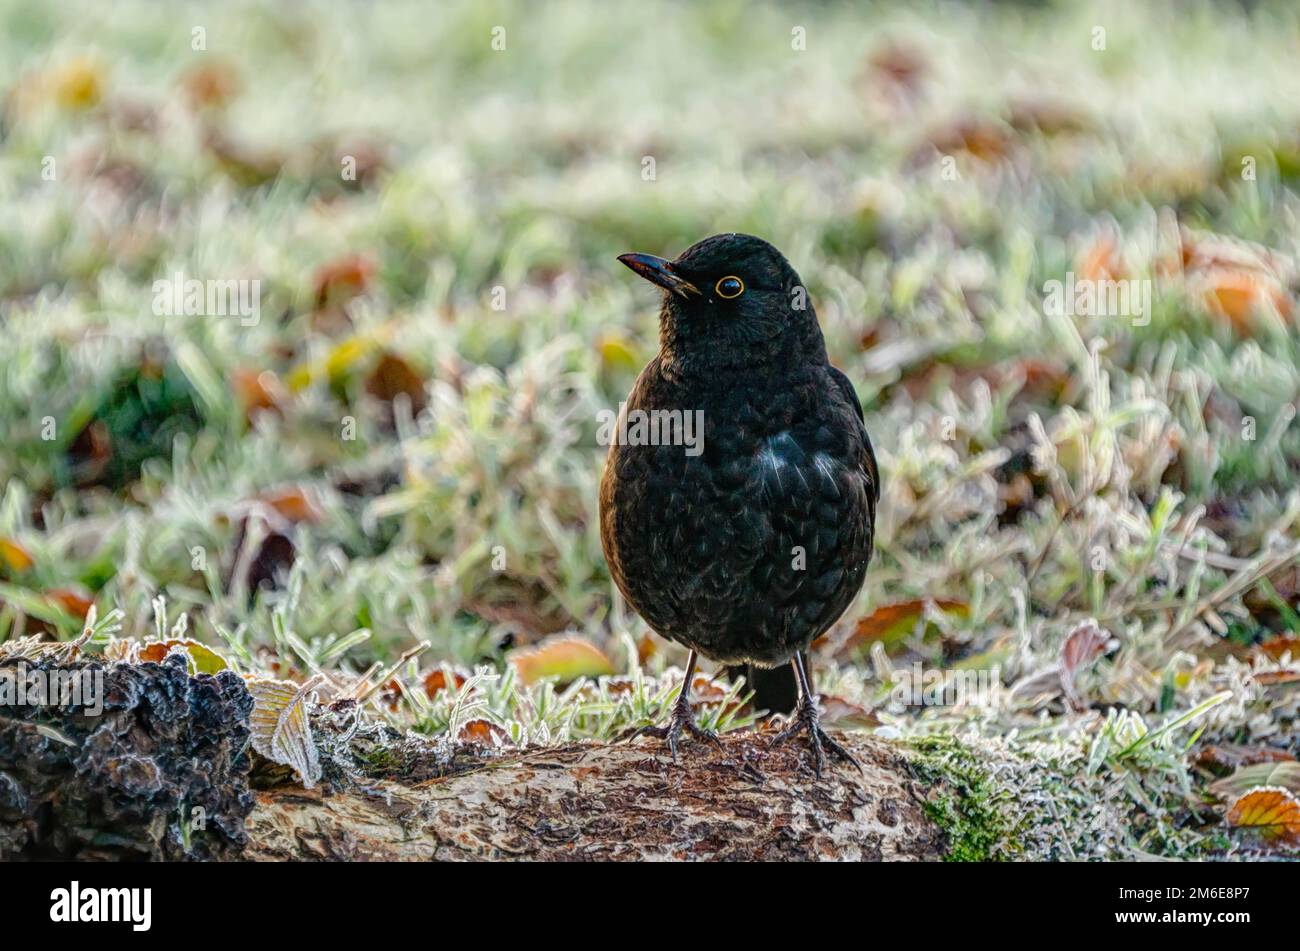 Sharply rendered and detailed blackbird foraging for worms in the frost laden grass under a tree on the back lawn, lovely yellow ring round the eye. Stock Photo